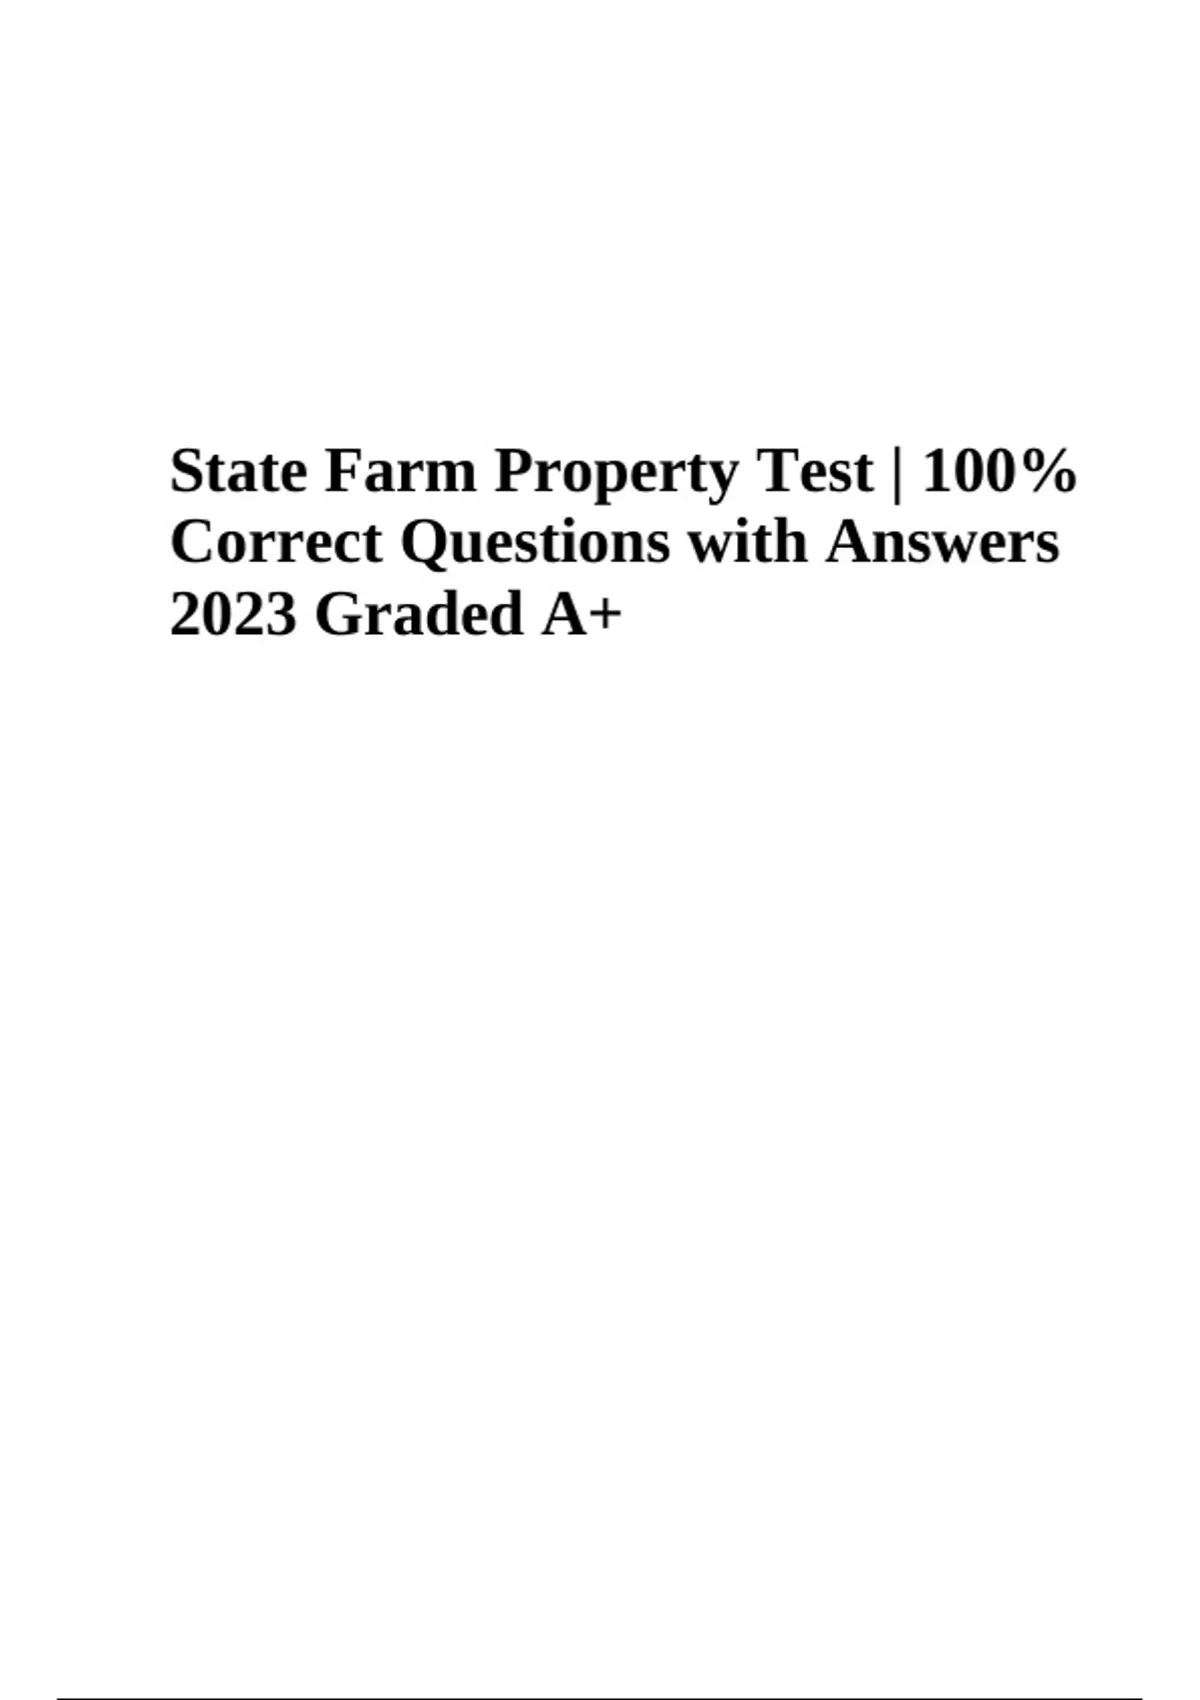 State Farm Property Certification Questions with Correct Answers 2023